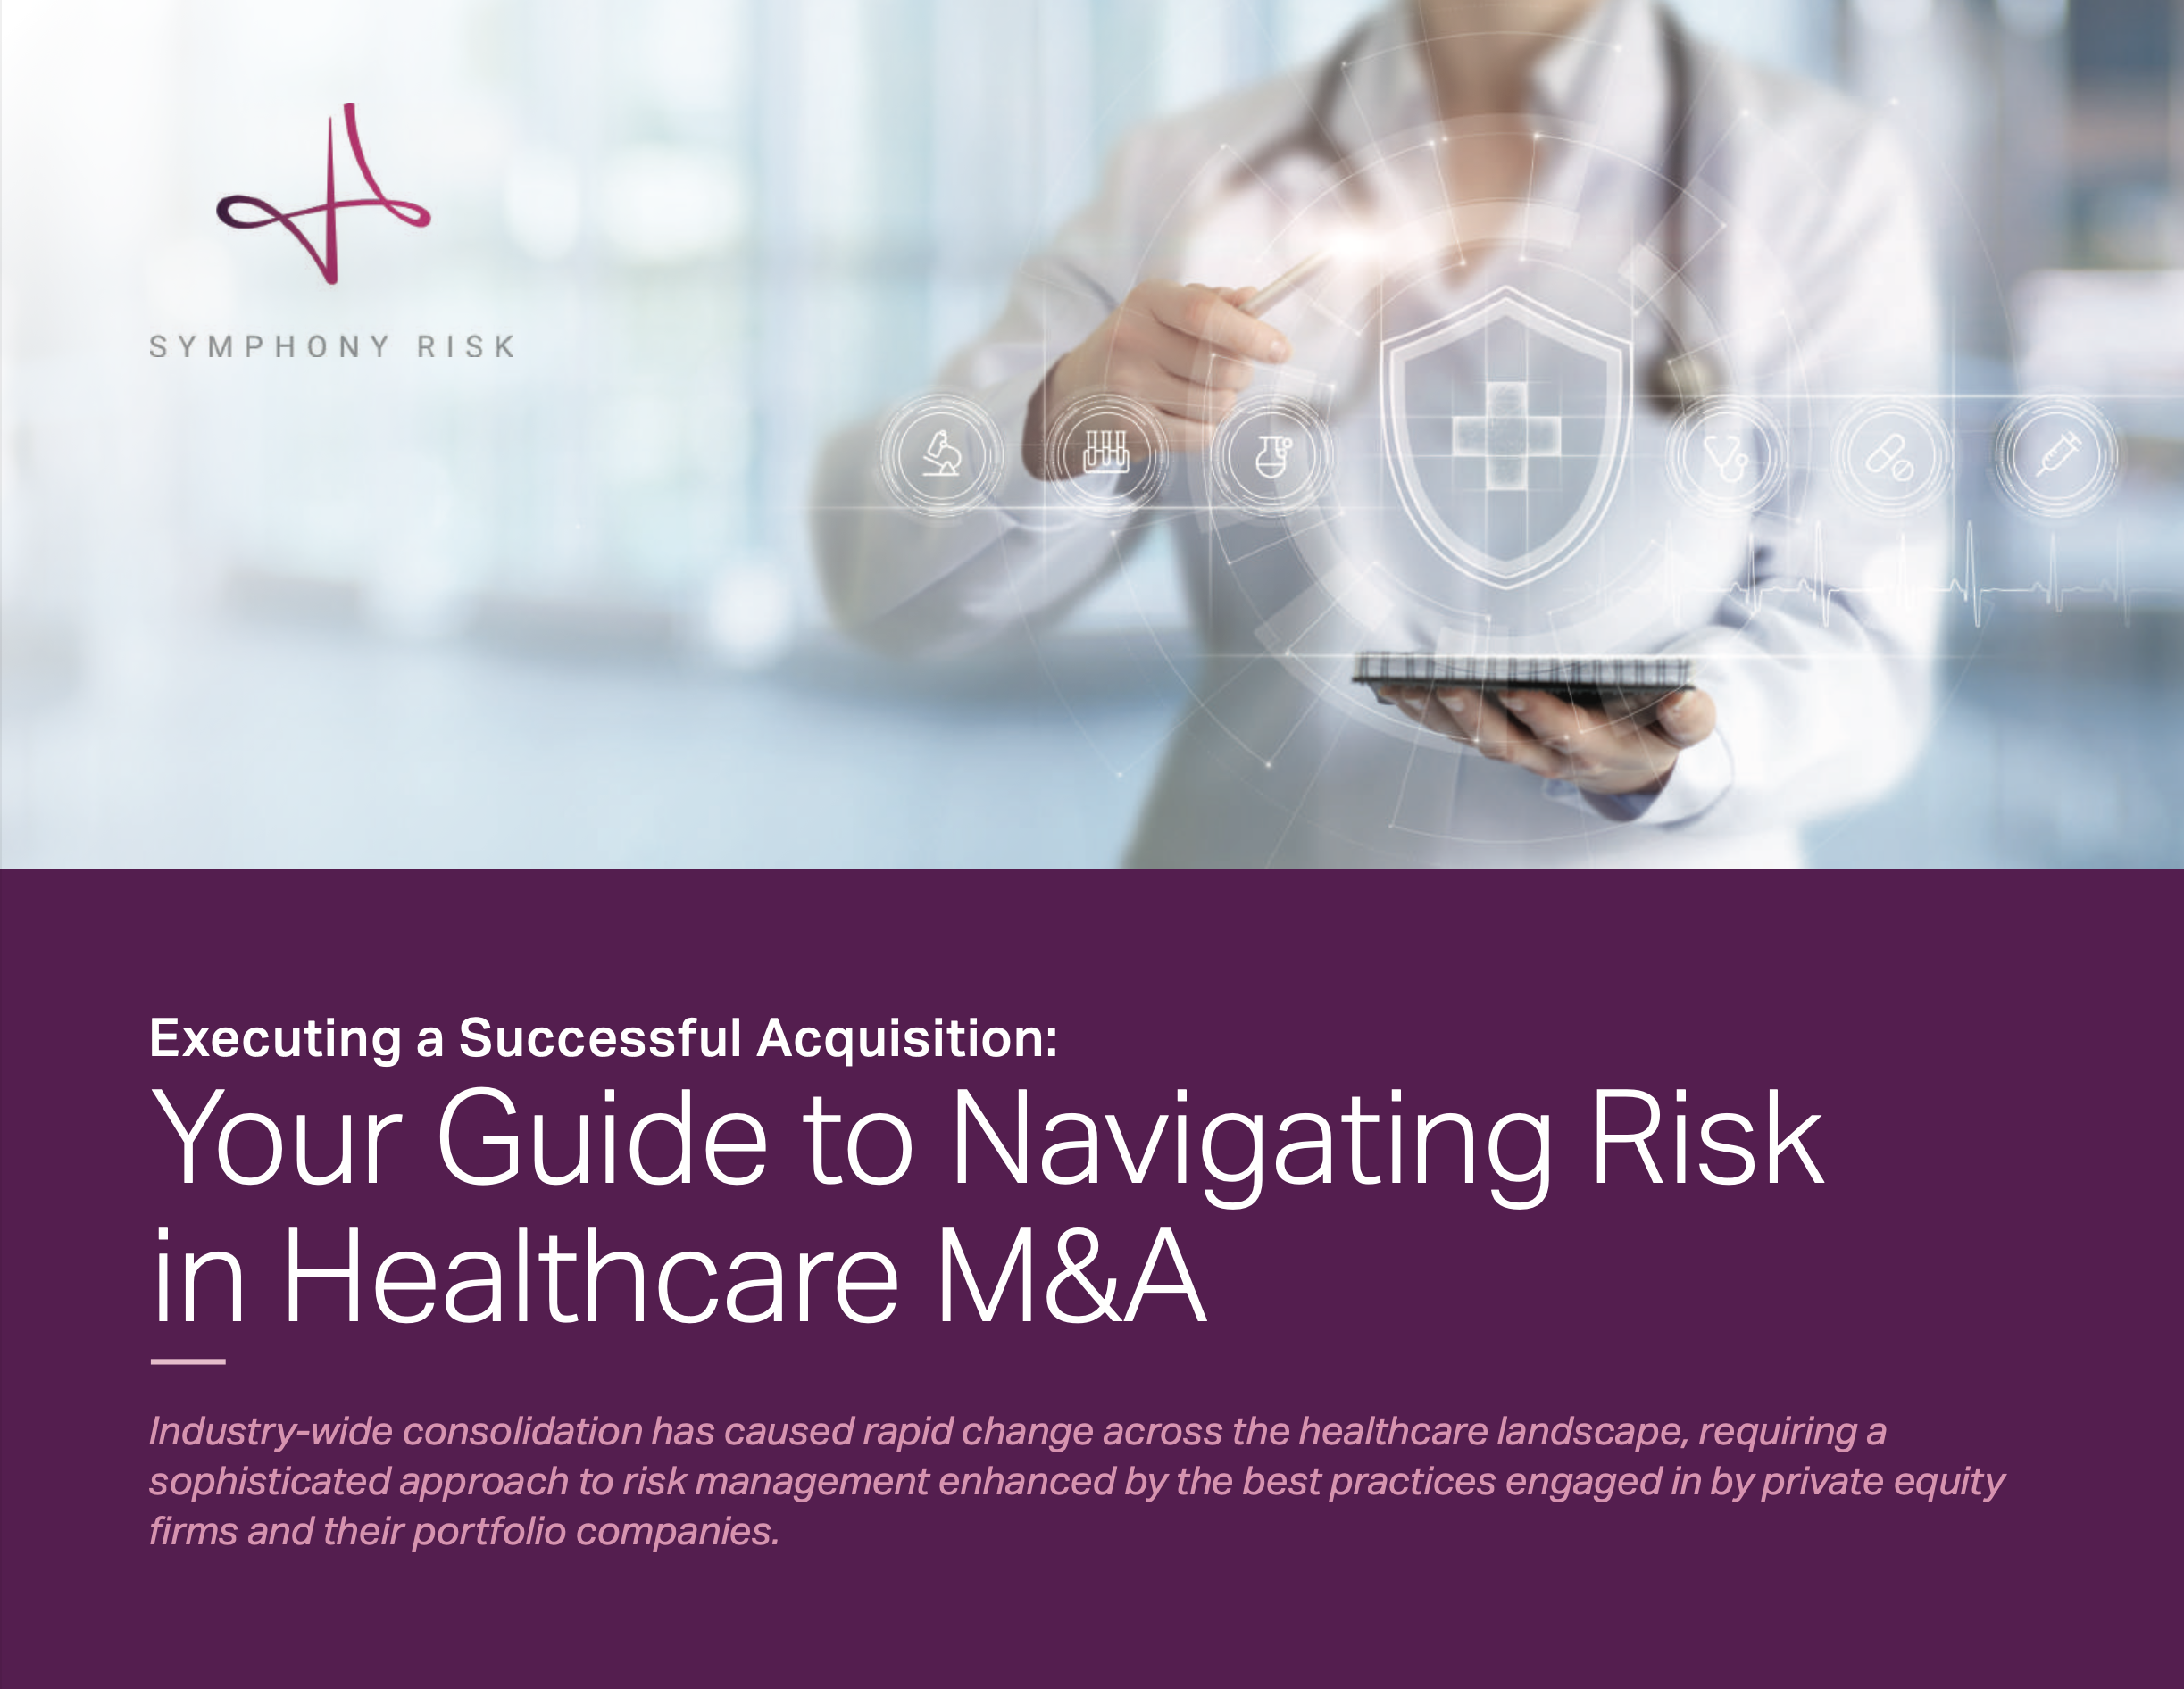 Your Guide to Navigating Risk in Healthcare M&A